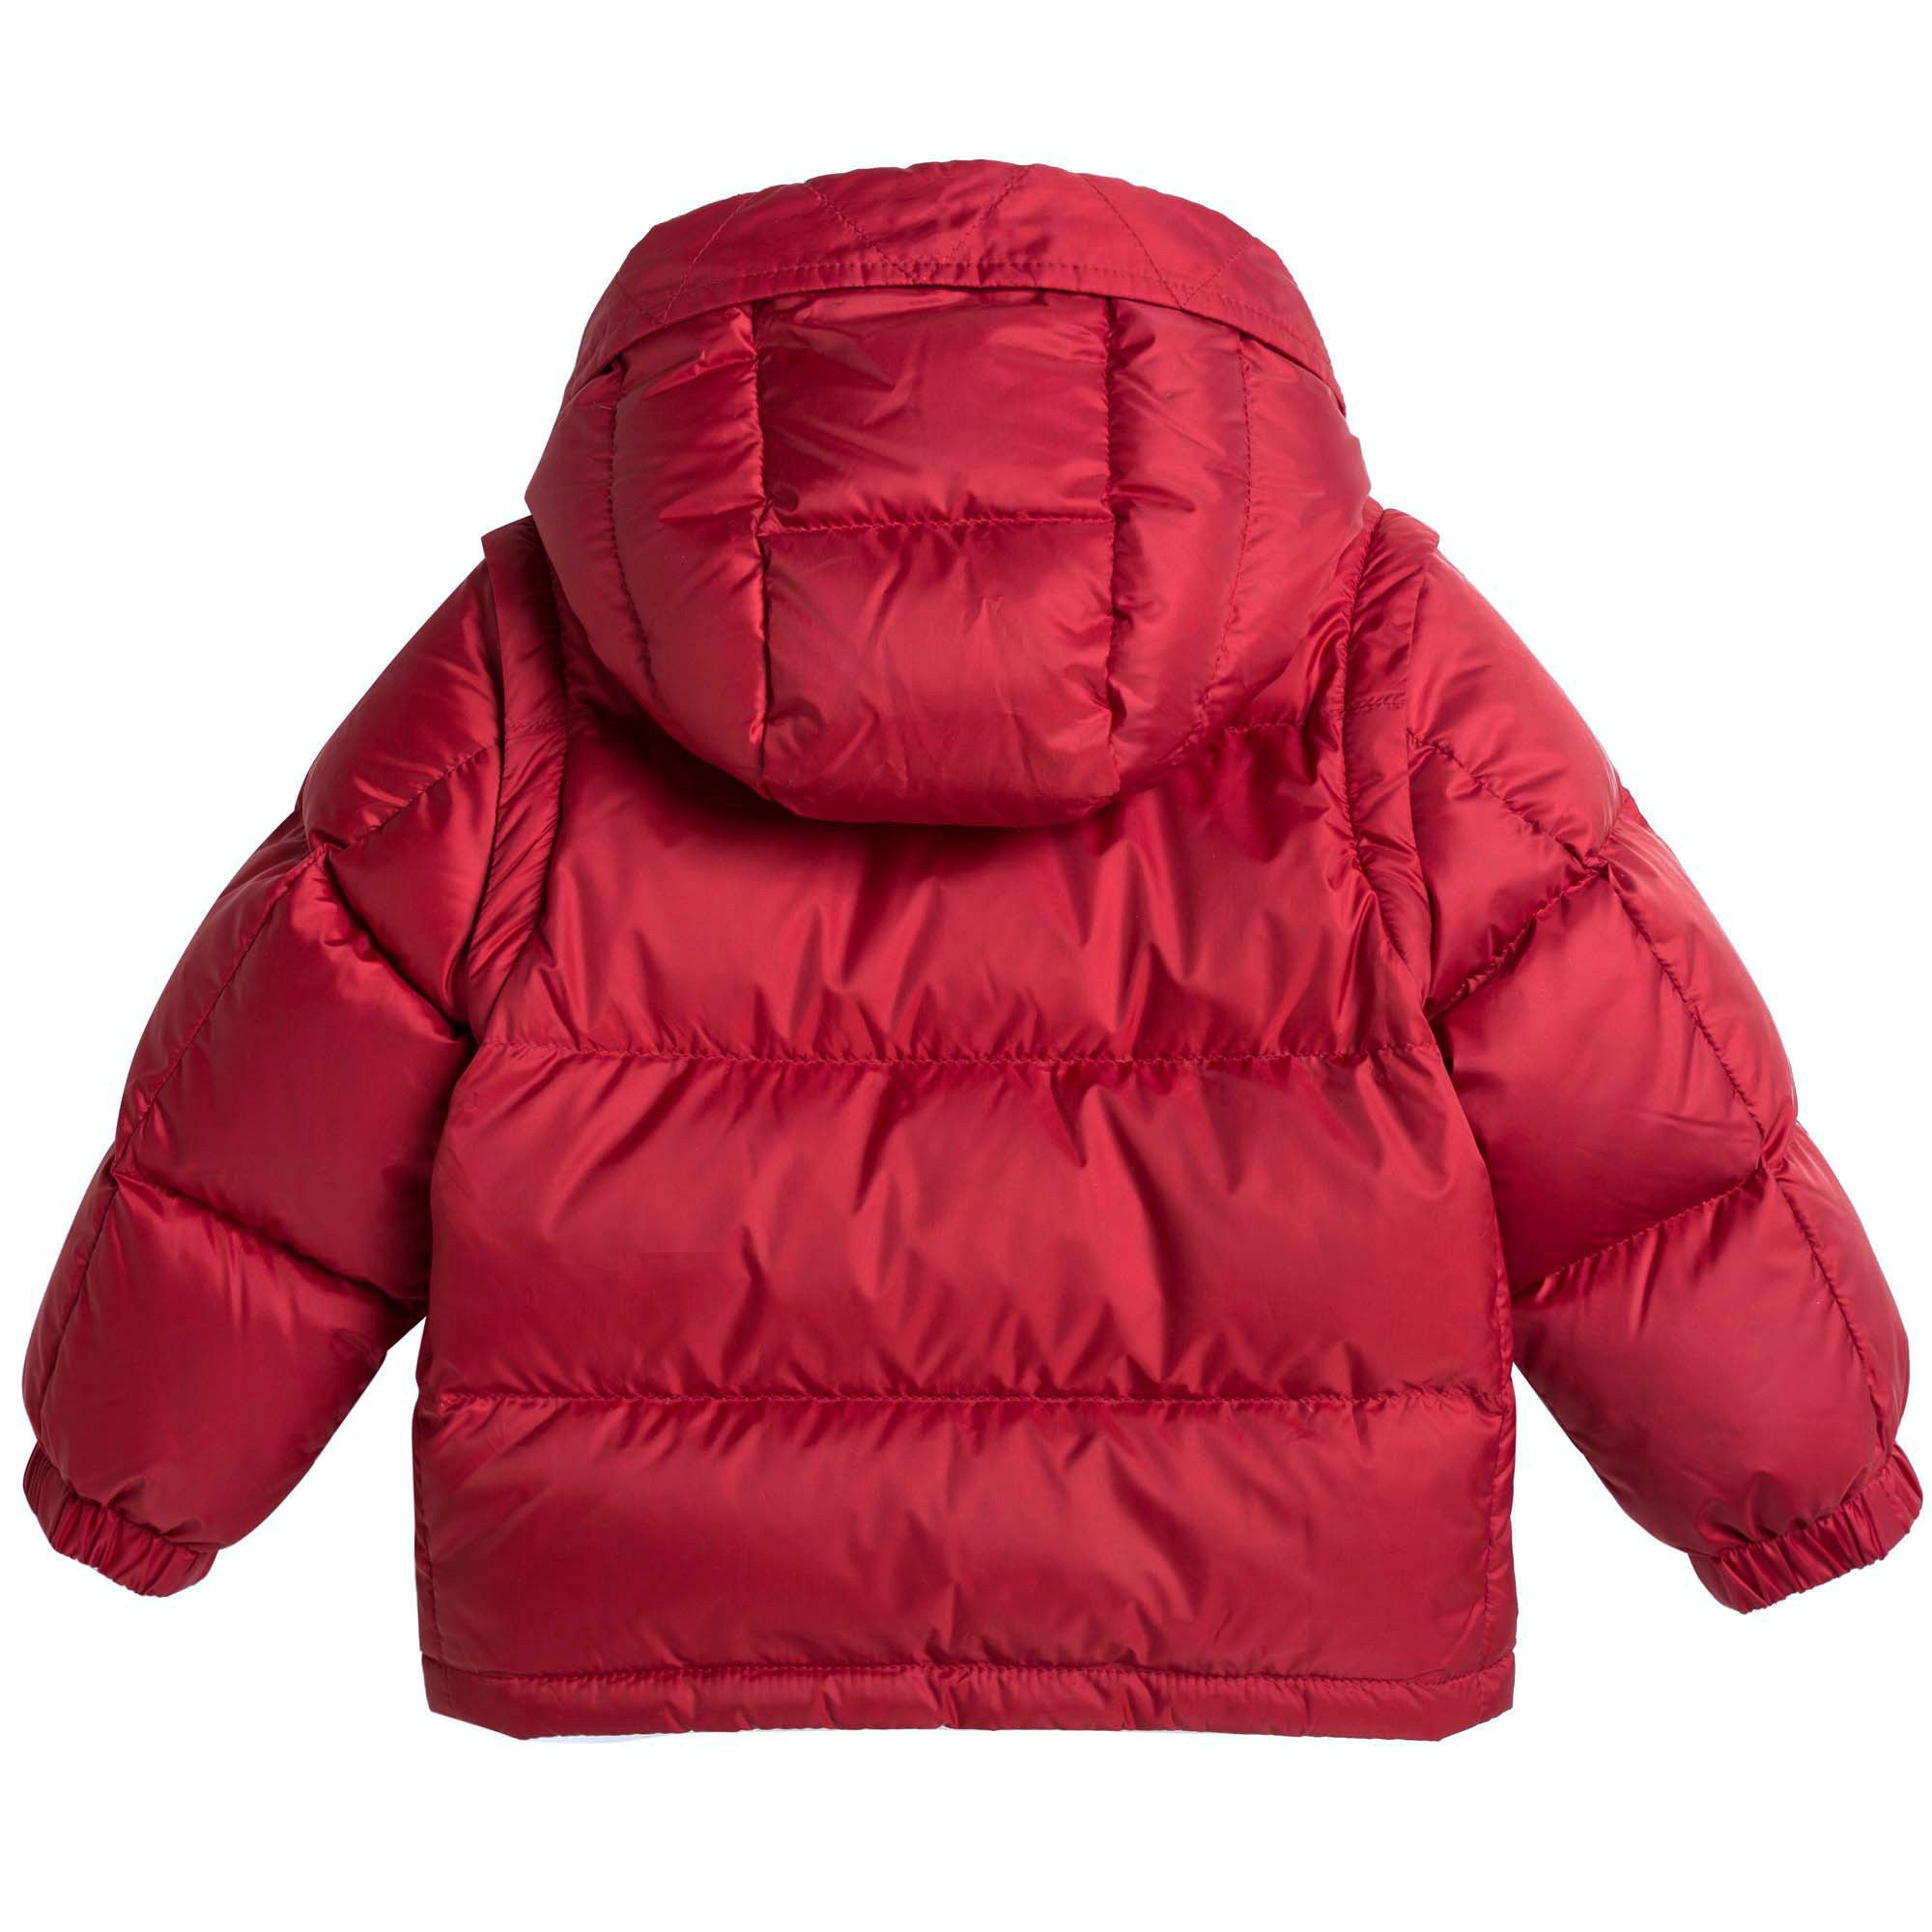 Baby Boys Red Hooded Padded Down Jacket - CÉMAROSE | Children's Fashion Store - 2